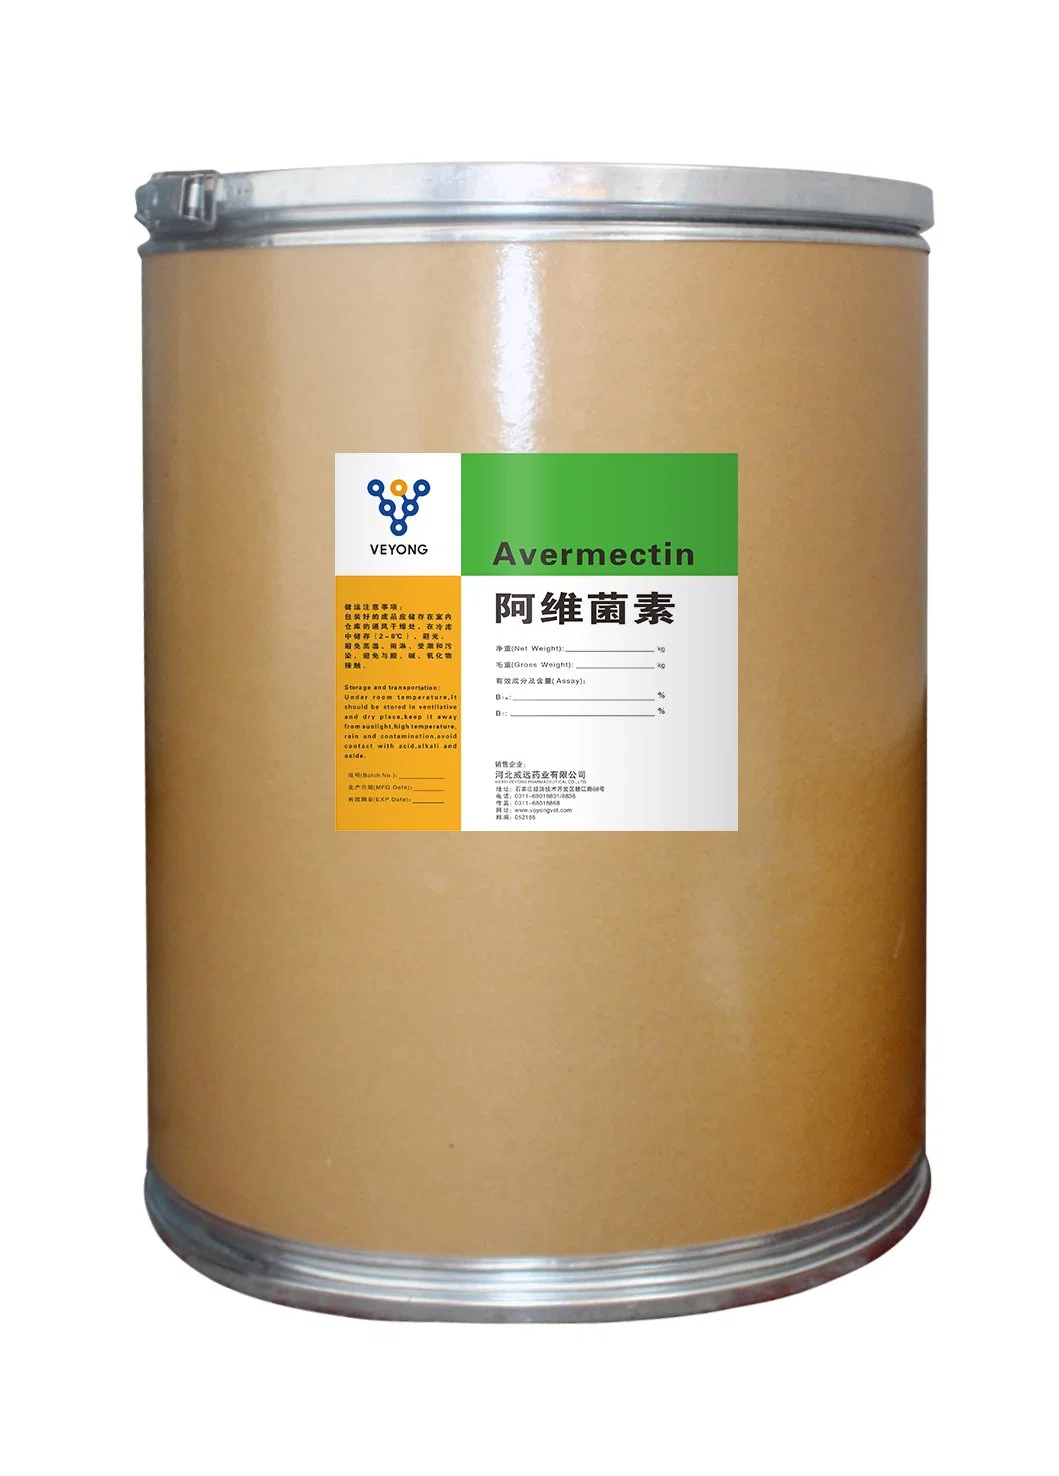 China Pharmaceutical Agriculture Medicines National Standard Abamectin, Avermectin, GMP, Factory Supplier